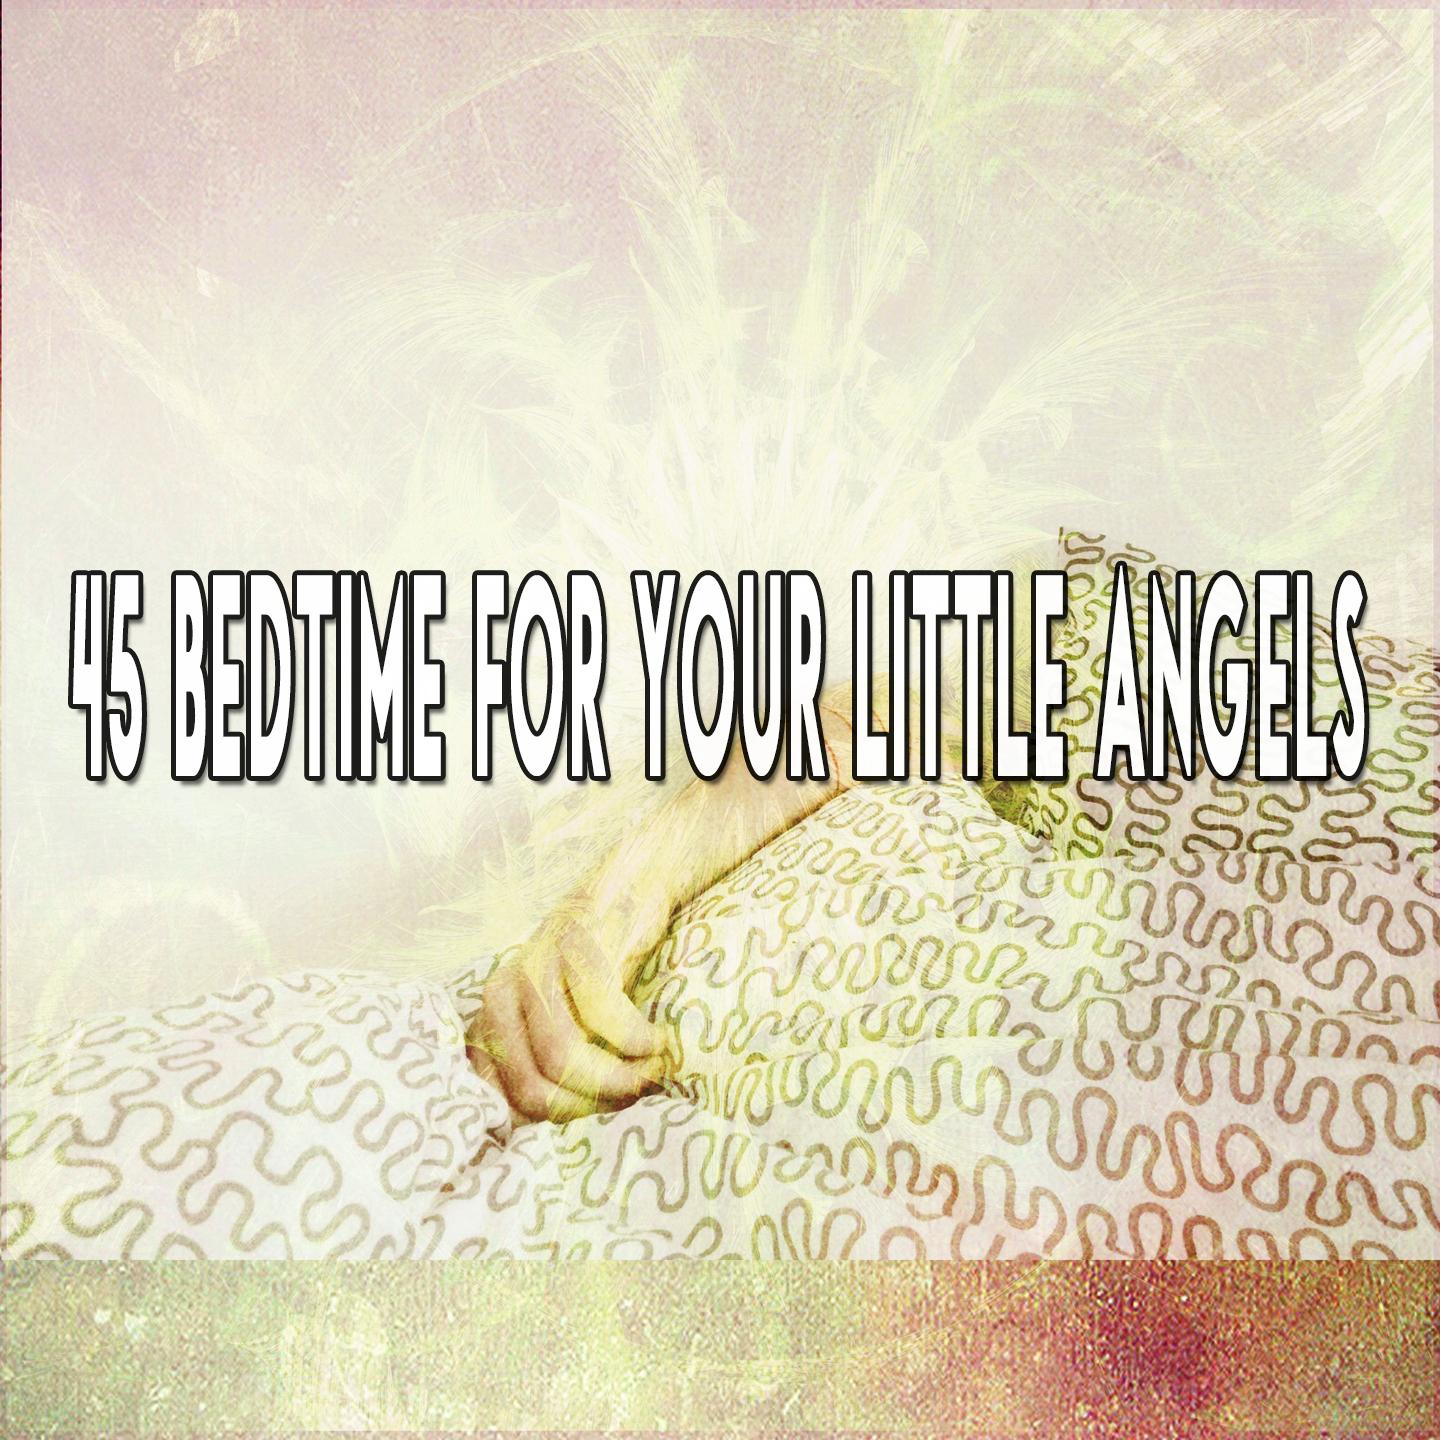 45 Bedtime For Your Little Angels